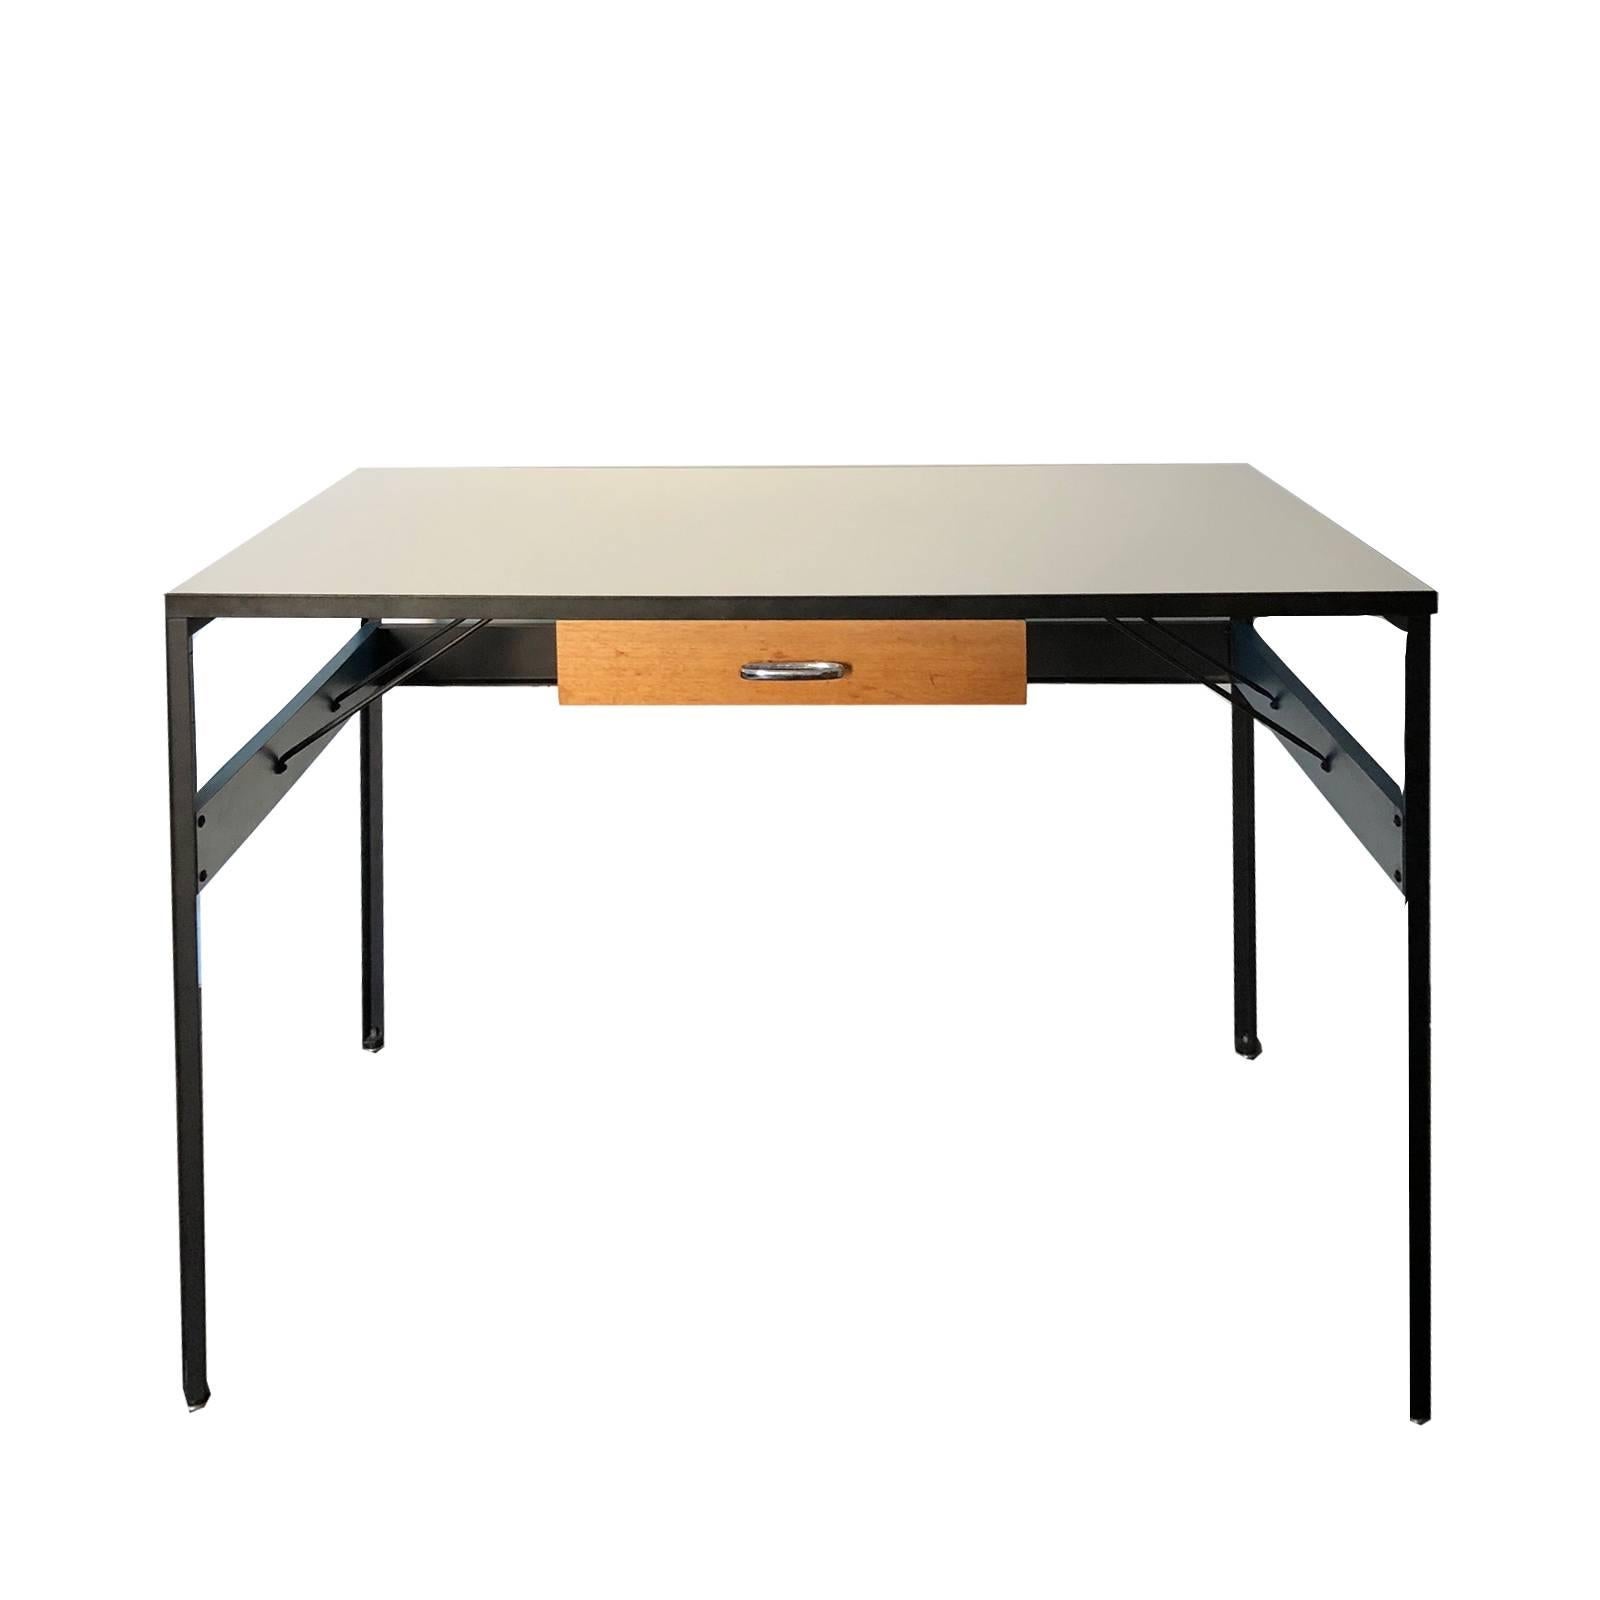 Iconic George Nelson Steelframe desk for Herman Miller. Top is a white laminate and steelframe is black enameled. Sides feature a blue painted wood frame. This is a quite an uncommon form with central drawer.
 